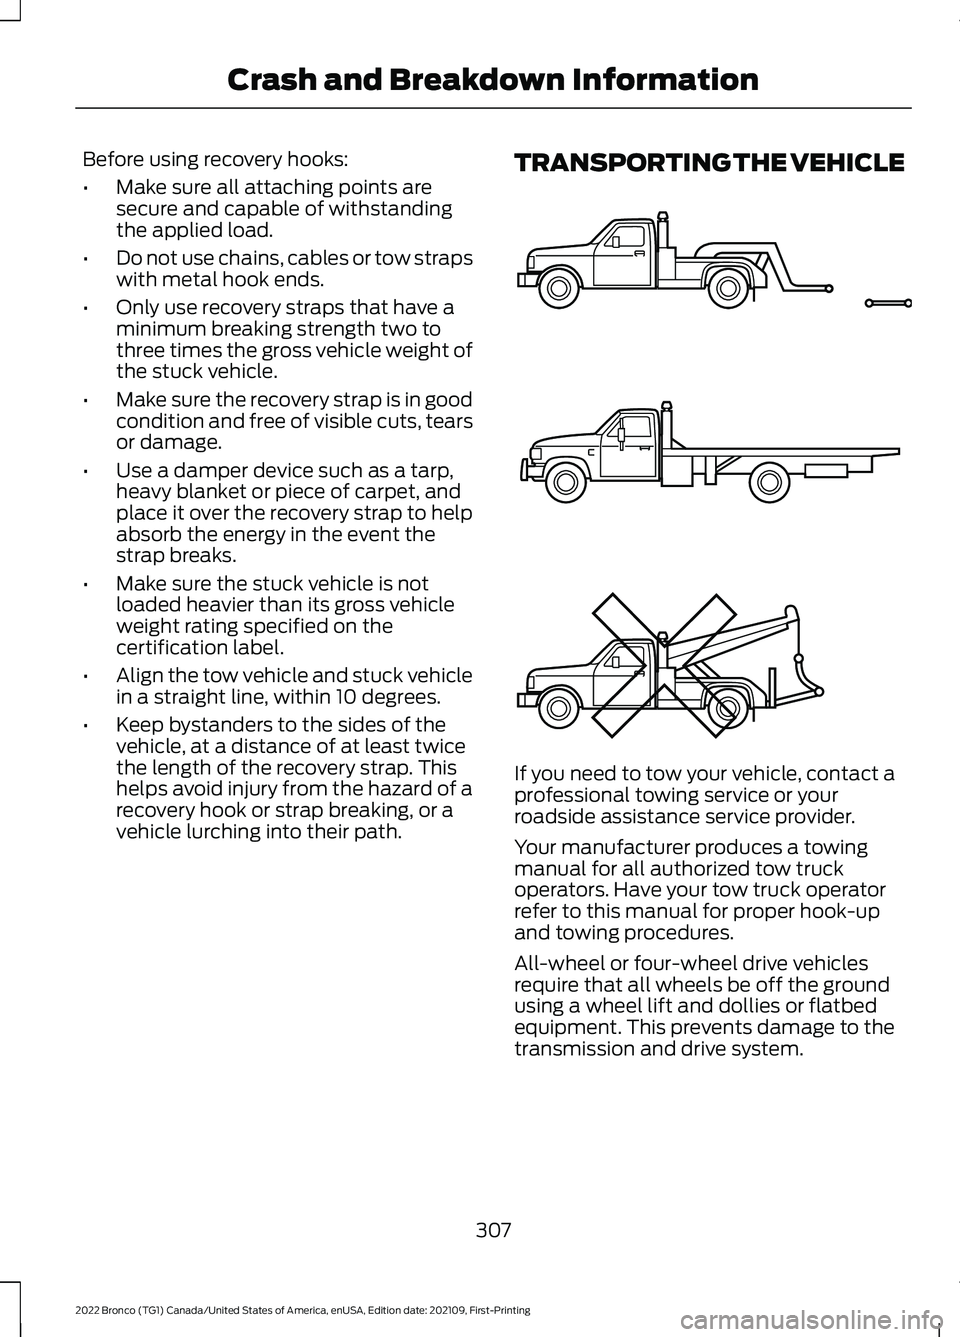 FORD BRONCO 2022 Service Manual Before using recovery hooks:
•Make sure all attaching points aresecure and capable of withstandingthe applied load.
•Do not use chains, cables or tow strapswith metal hook ends.
•Only use recove